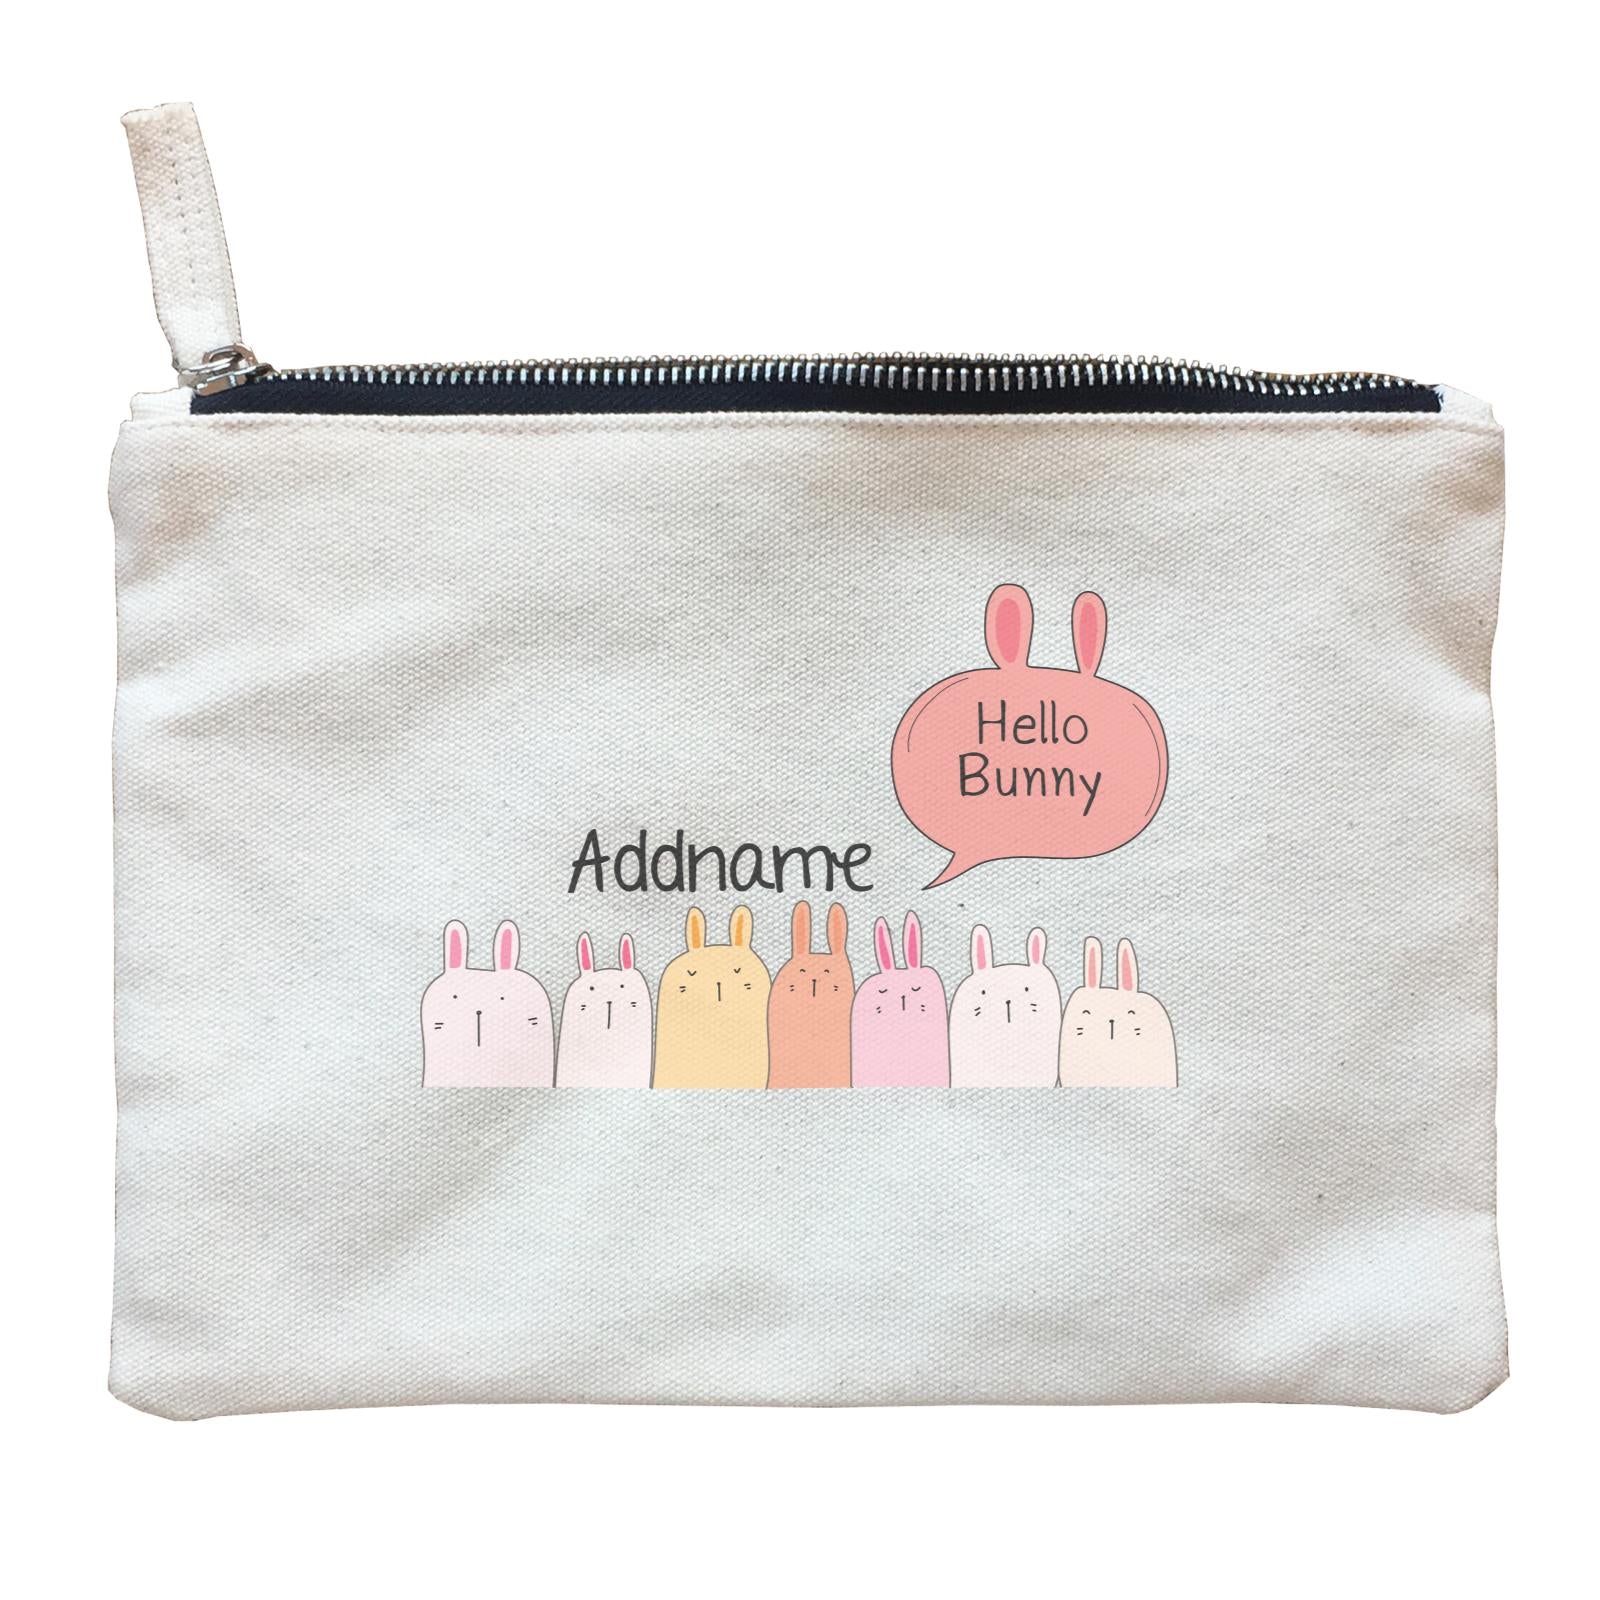 Cute Animals And Friends Series Hello Bunny Group Addname Zipper Pouch